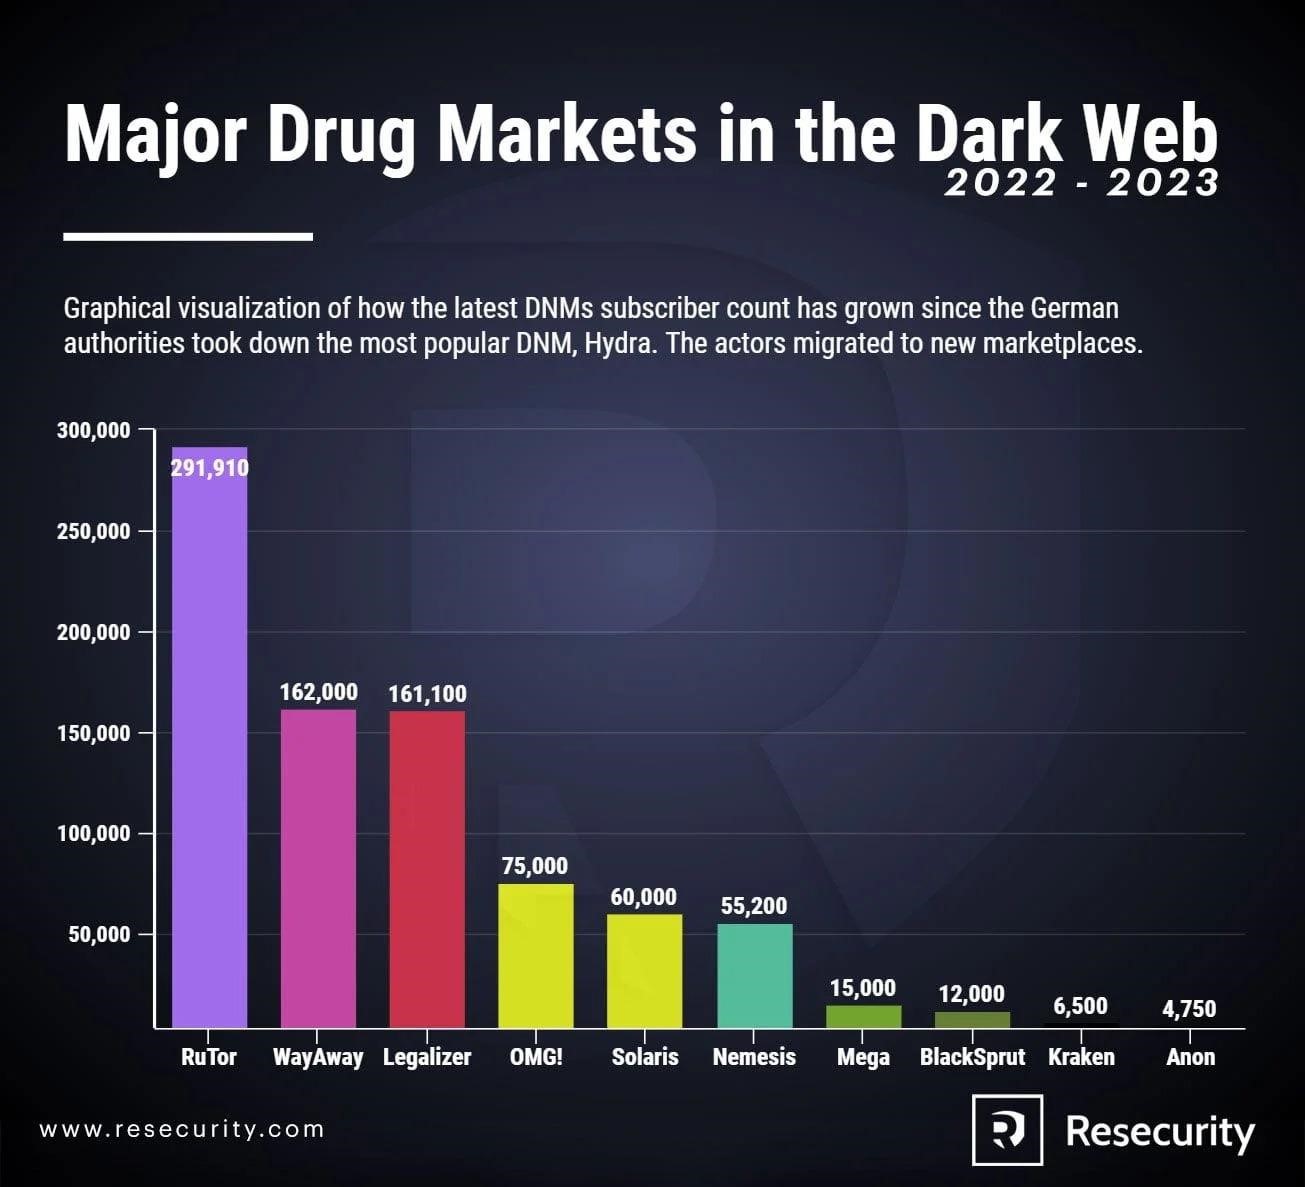 Drugs and Android Apps